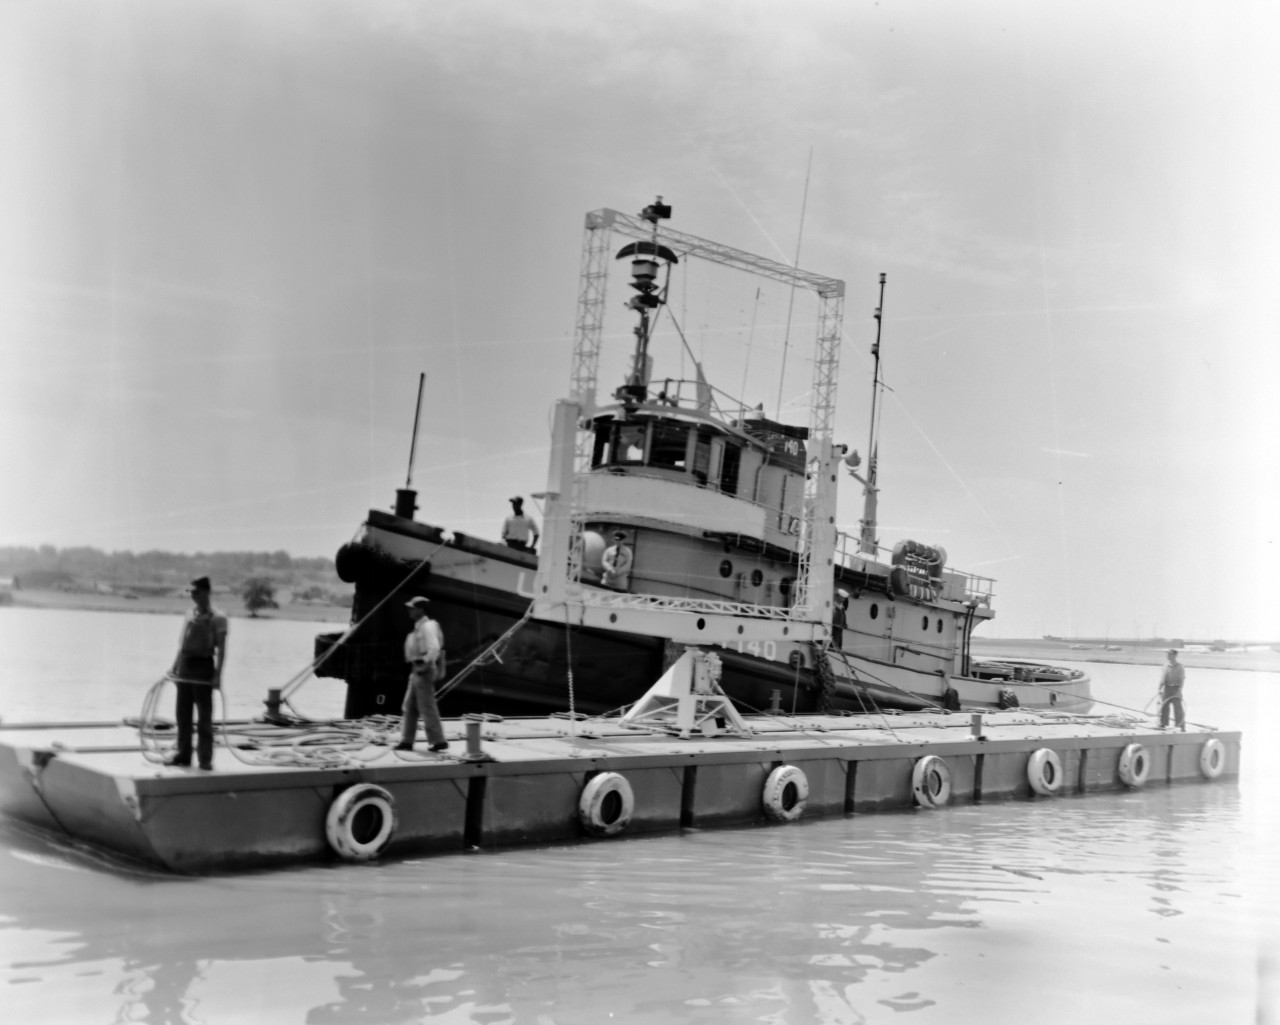 NMUSN-1019:   XAF Radar Antenna, 1960s.   Being delivered to the Washington Navy Yard for display.  Note the U.S. Navy tug alongside a small thin barge carrying the radar antenna.  The tug appears to be USS Wahtah (YTB-140).  This radar was the first shipboard radar to be installed onboard a U.S. Navy ship, USS New York (BB-34).  Surviving World War II, it was brought to the Washington Navy Yard where it was on exterior display until the mid-1980s where it was placed into storage.   Following conservation, the radar is now on display at the National Electronics Museum, Linthicum, Maryland.    Original is a black and white negative.   National Museum of the U.S. Navy Photograph Collection.